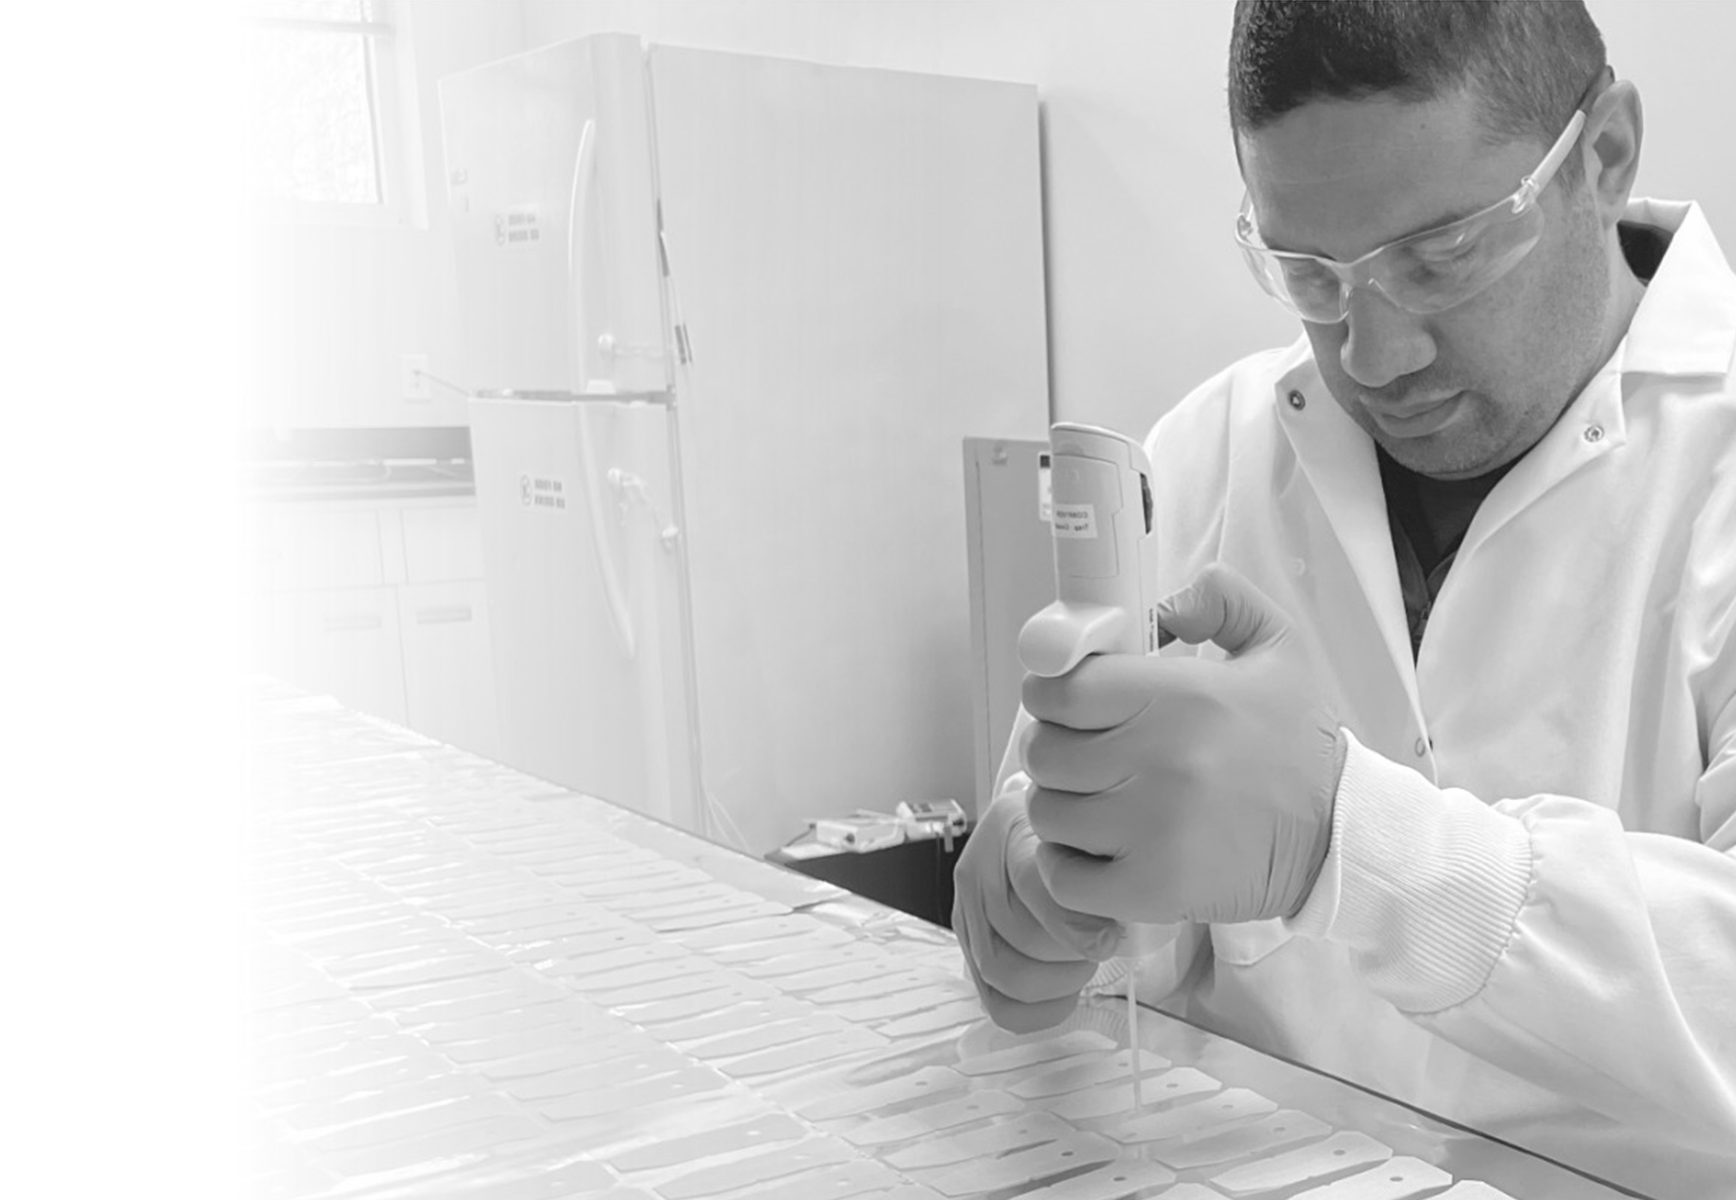 A man wearing a lab coat and goggles uses a pipette to apply samples to a number of test strips